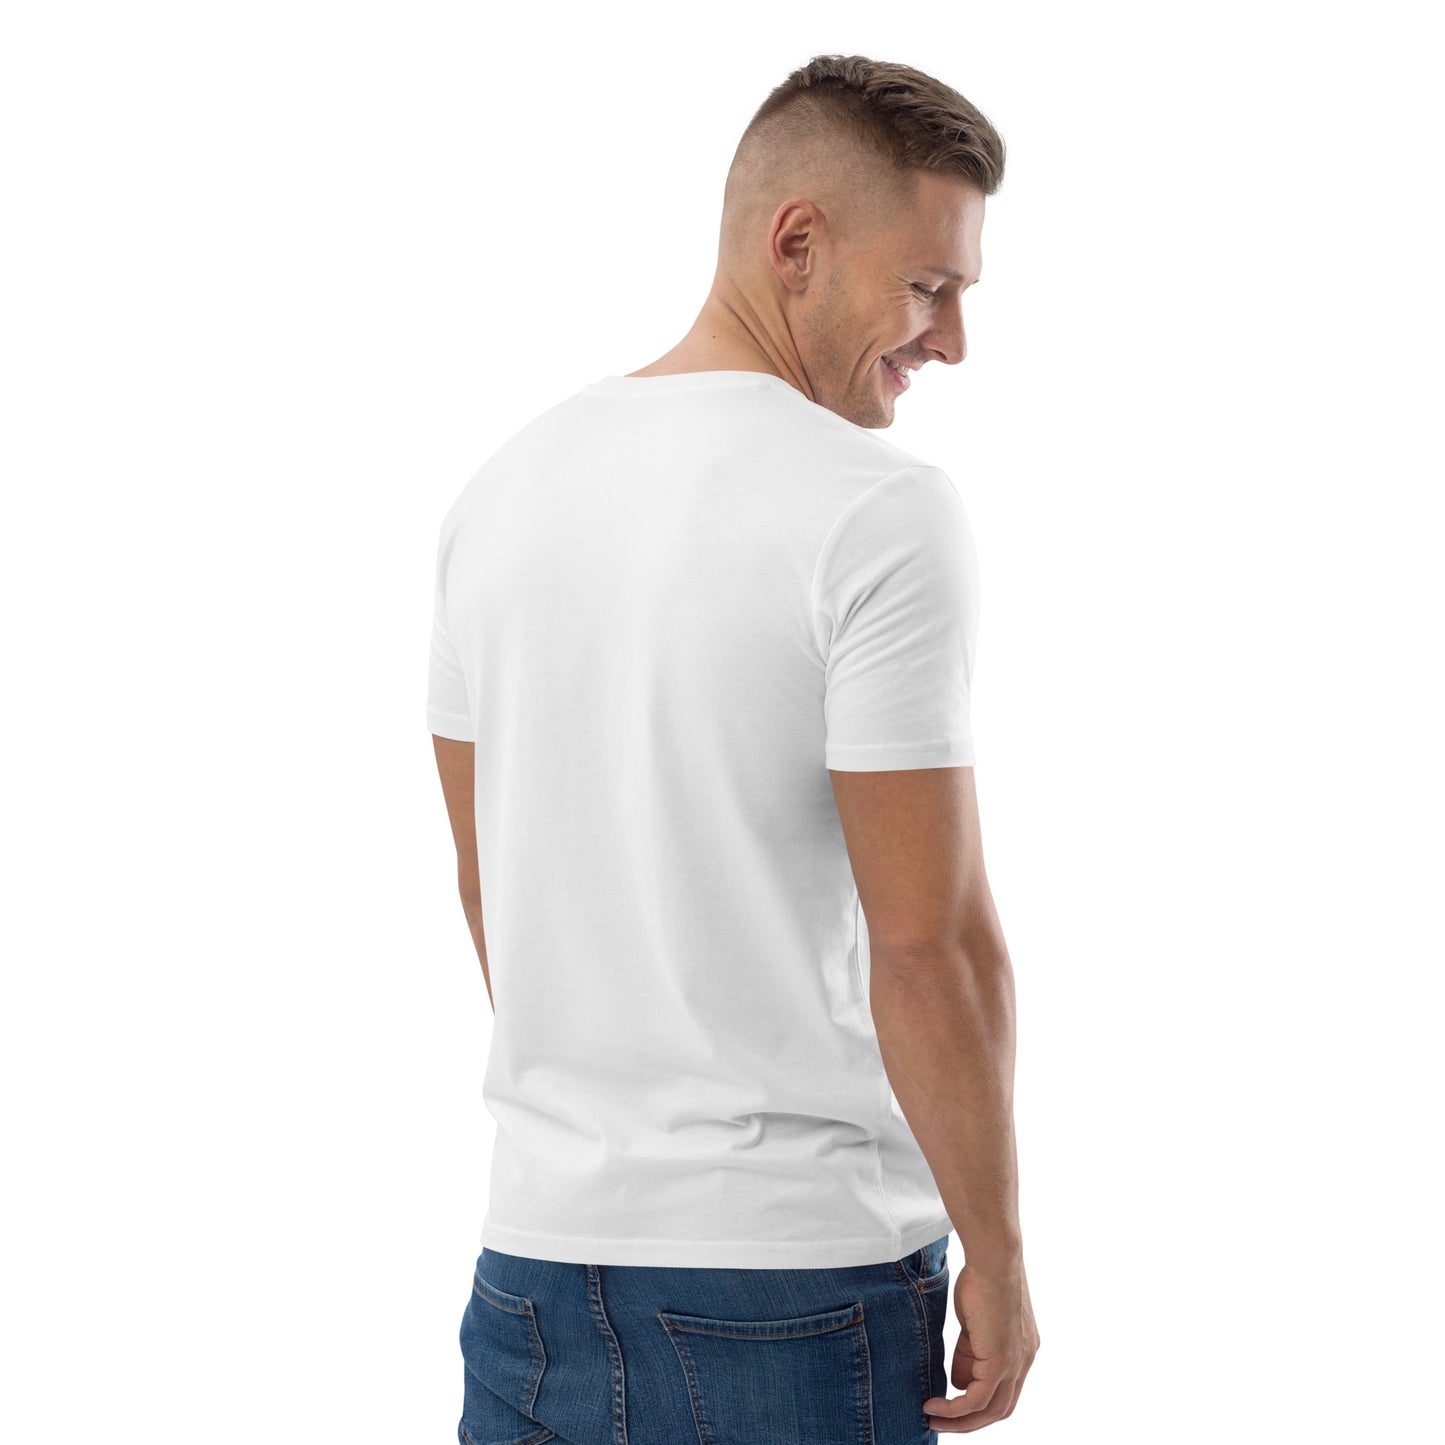 Weirdo | The aliens are here! It’s on the news! Ufo is shot out of the air and maybe that means the aliens are here! Stand up for your believes with this white, cotton and organic t shirt for men!